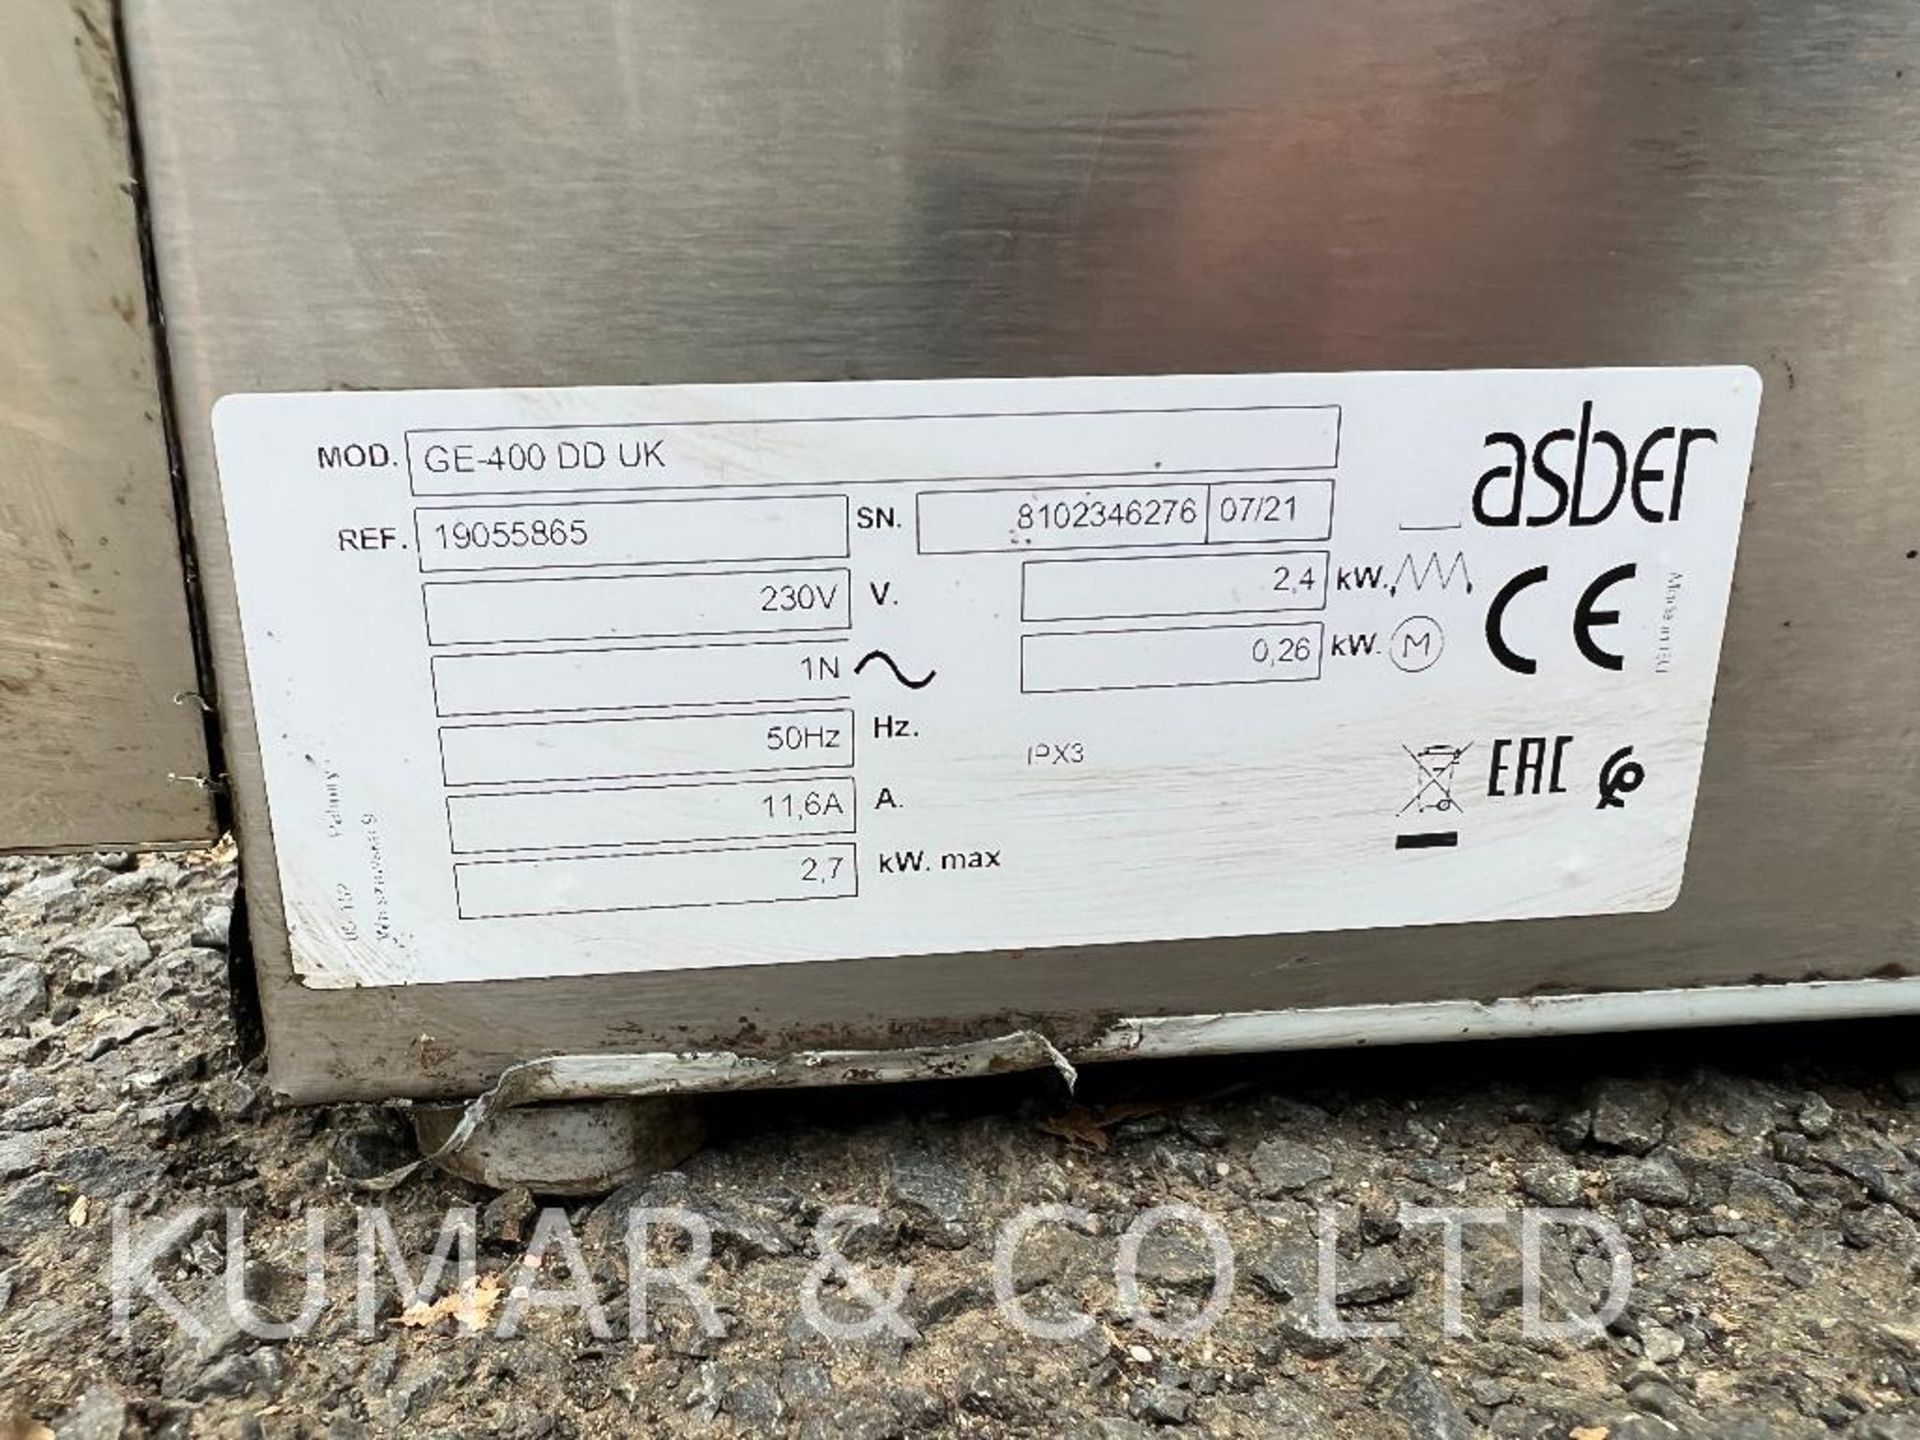 Asber Commercial Stainless Steel Dishwasher with Single Rack and 230v UK Domestic Plug. Model No: GE - Image 6 of 6